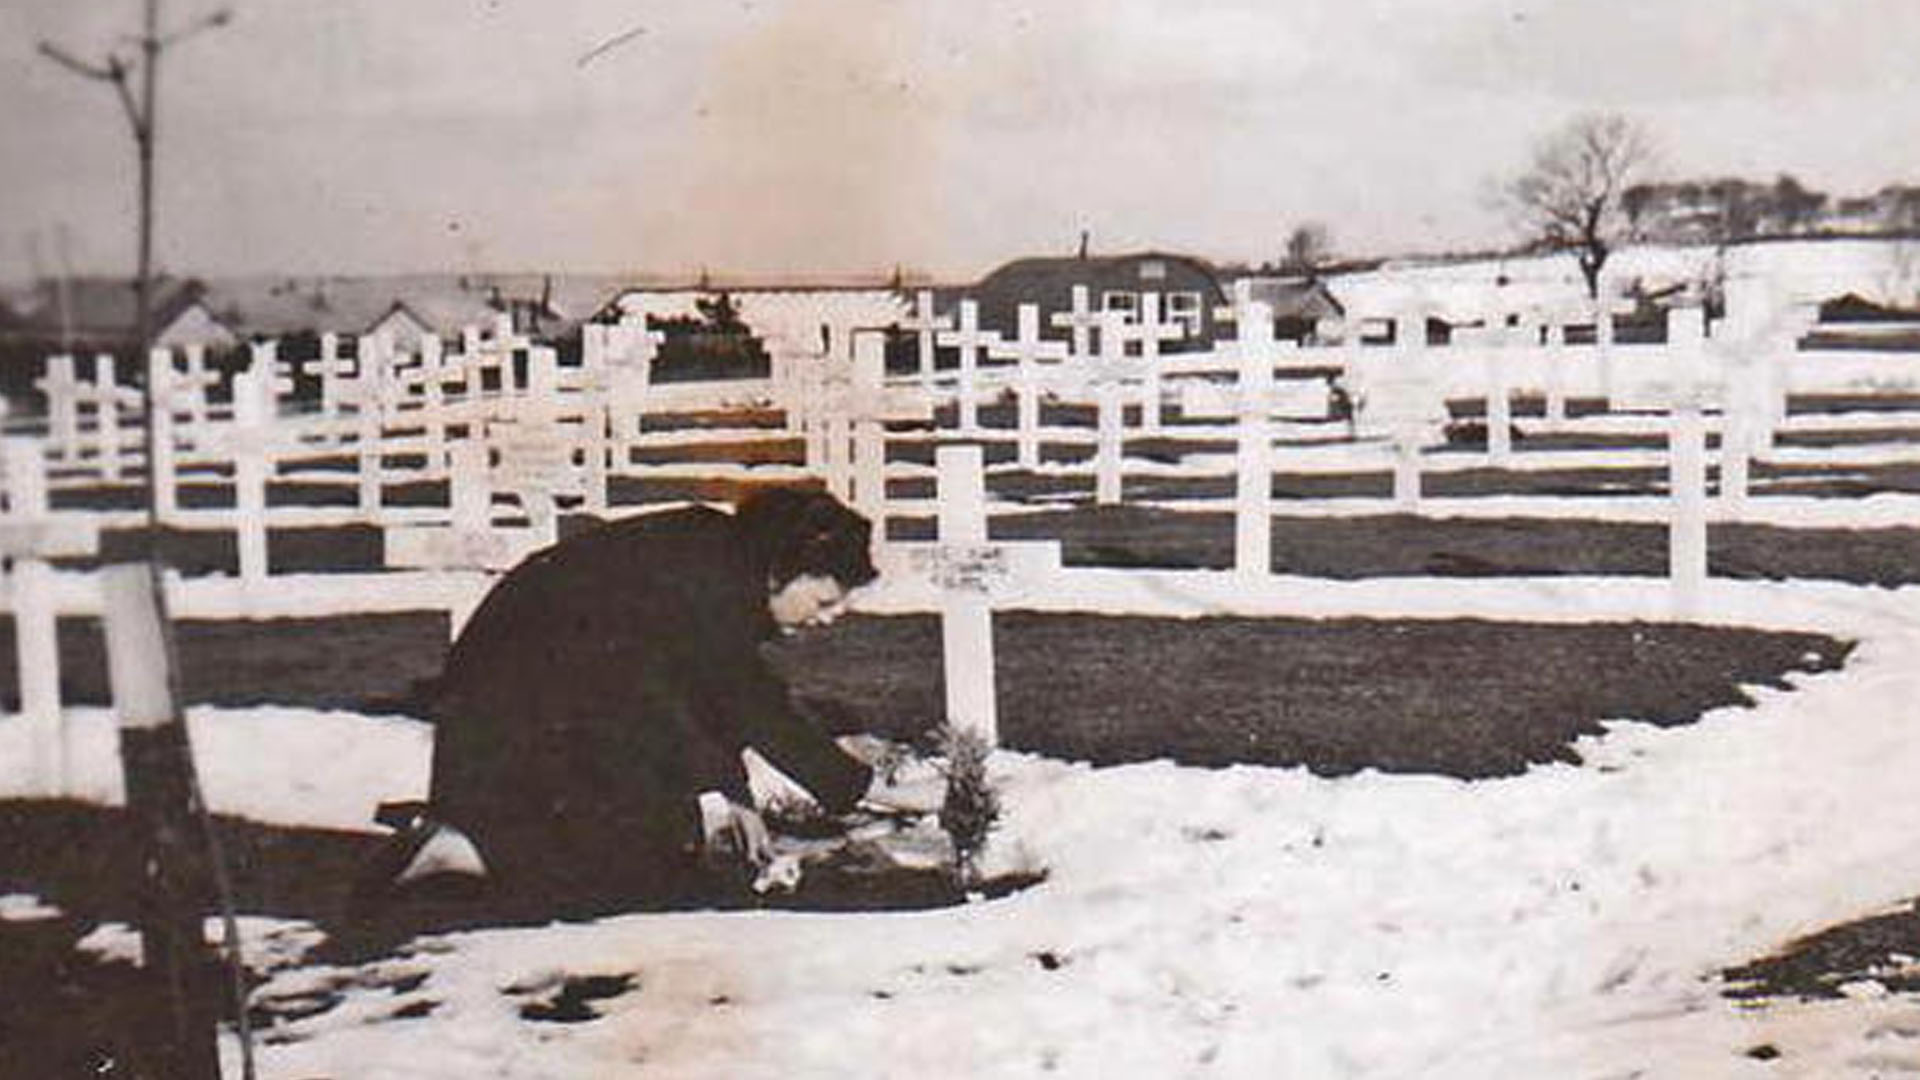 A woman tends the grave of Corporal John "Jack" Gibson who was killed when B17 41-24451 crashed on Slieveanorra on 3rd October 1942. Photo taken at Lisnabreeny American Cemetery, Castlereagh, Belfast and published in Duluth News Tribune. Copyright unknown.